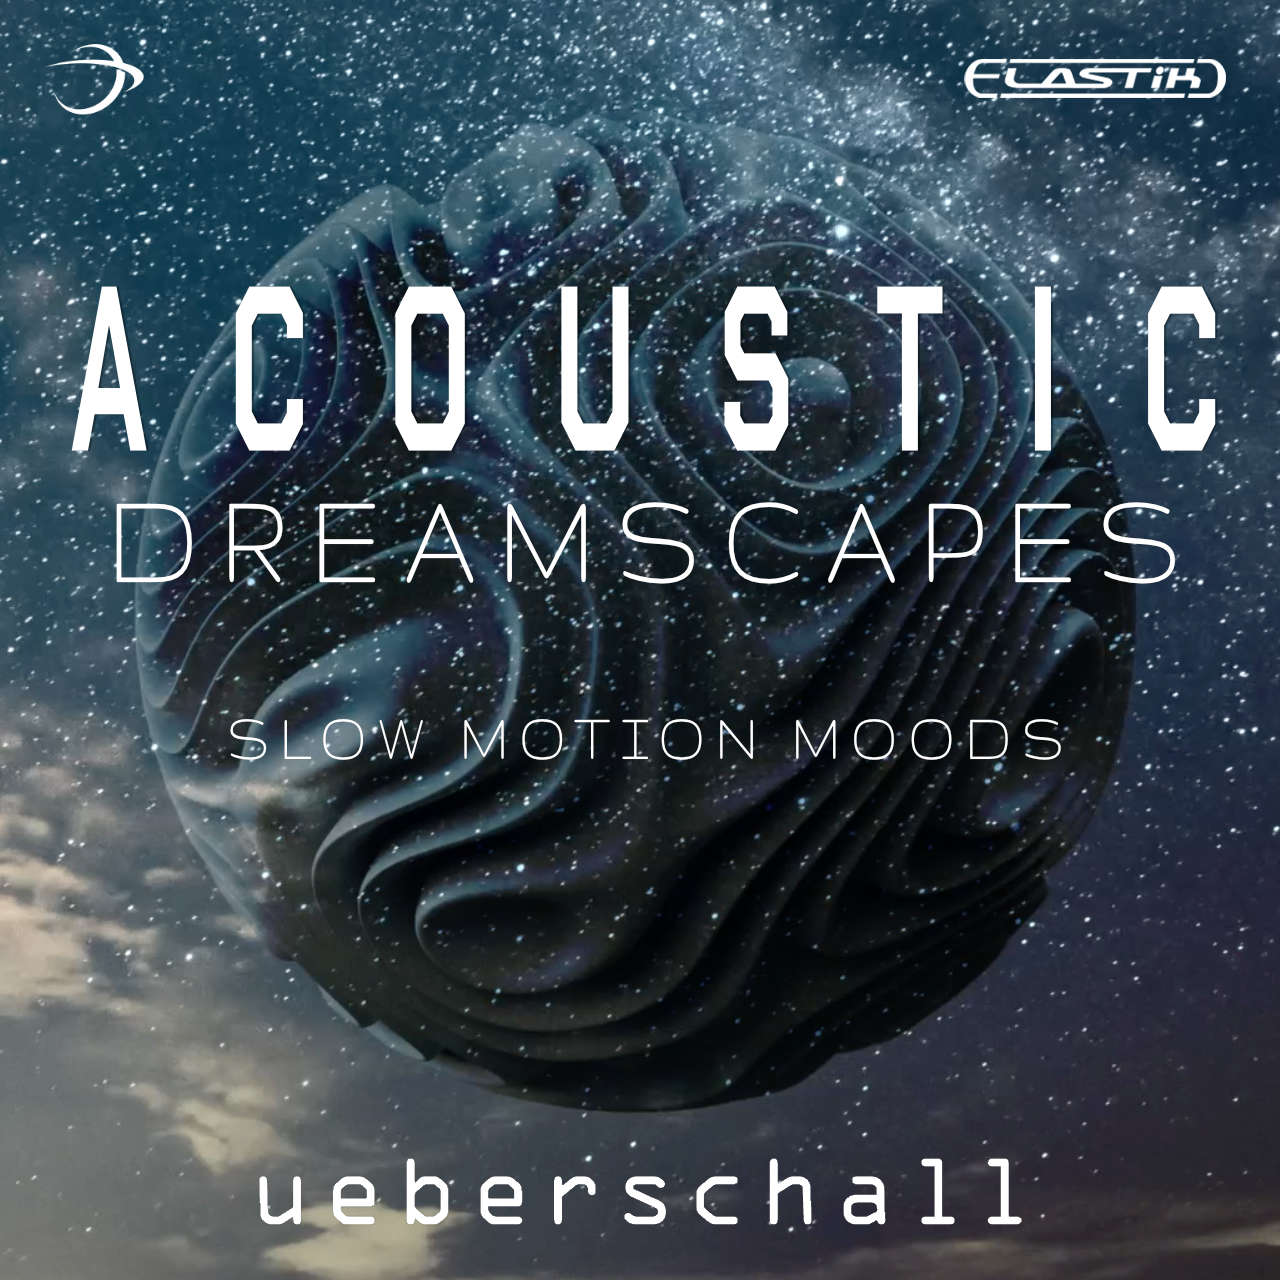 Acoustic Dreamscapes-ueberschall-1280x1280.jpg